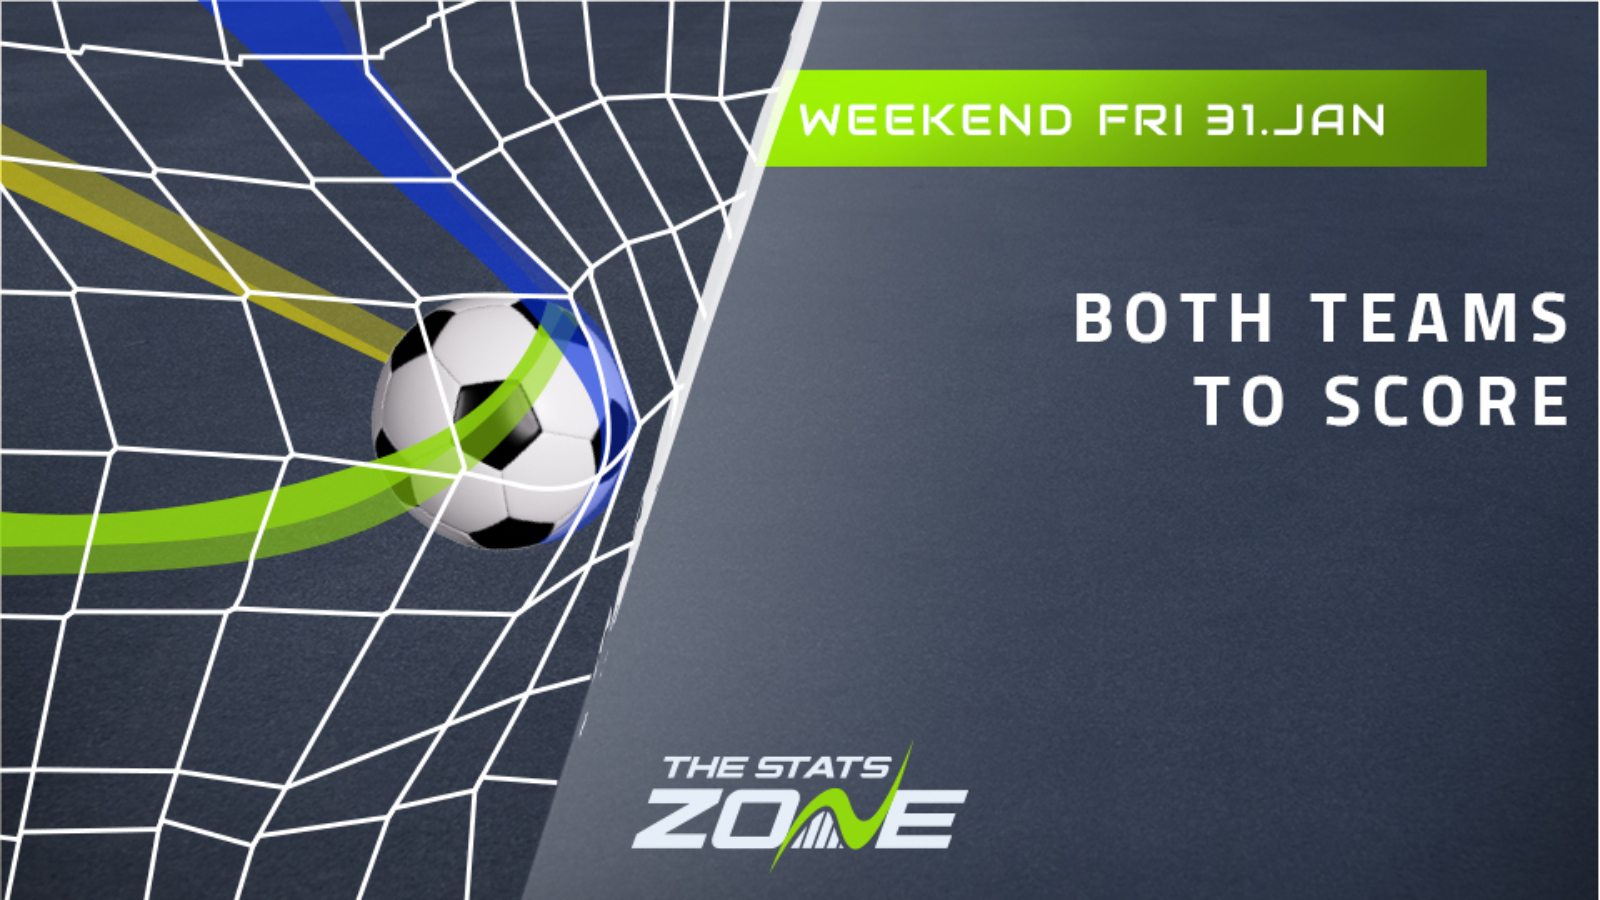 Both teams to score tips for your weekend accumulator The Stats Zone